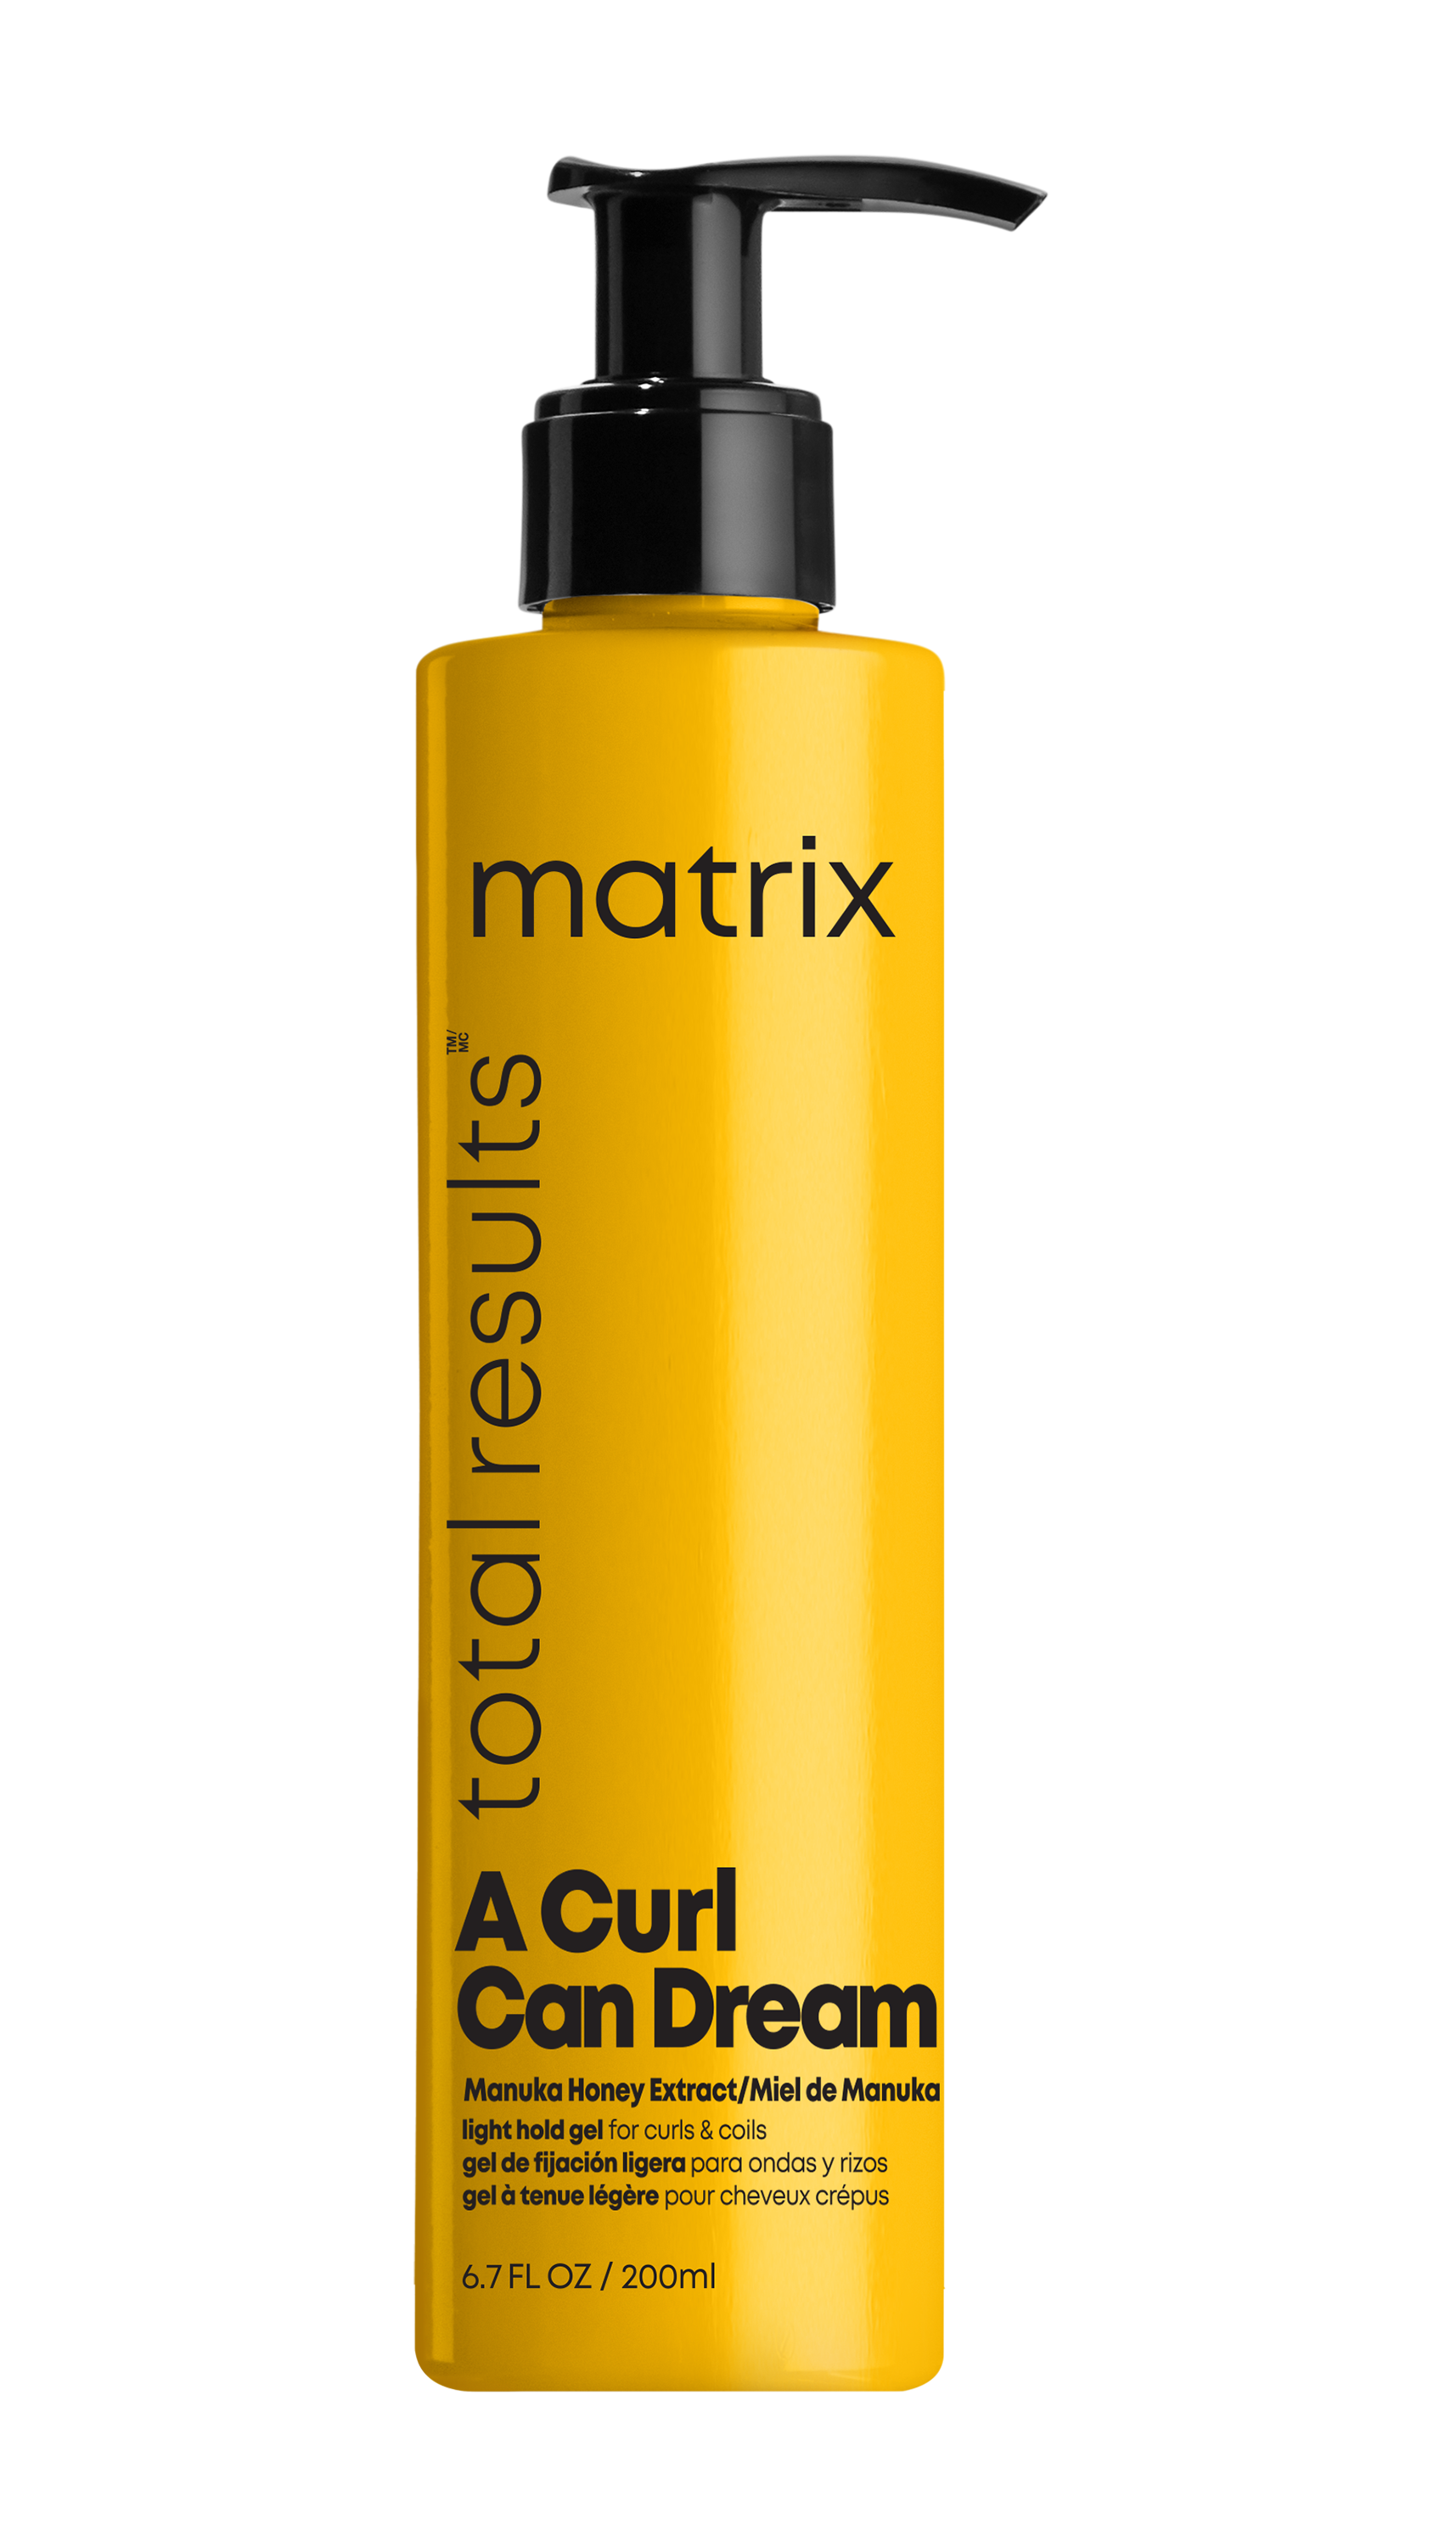 A Curl Can Dream Manuka Honey Extract Light Hold Gel for curls & coils €19,55* - 200ml